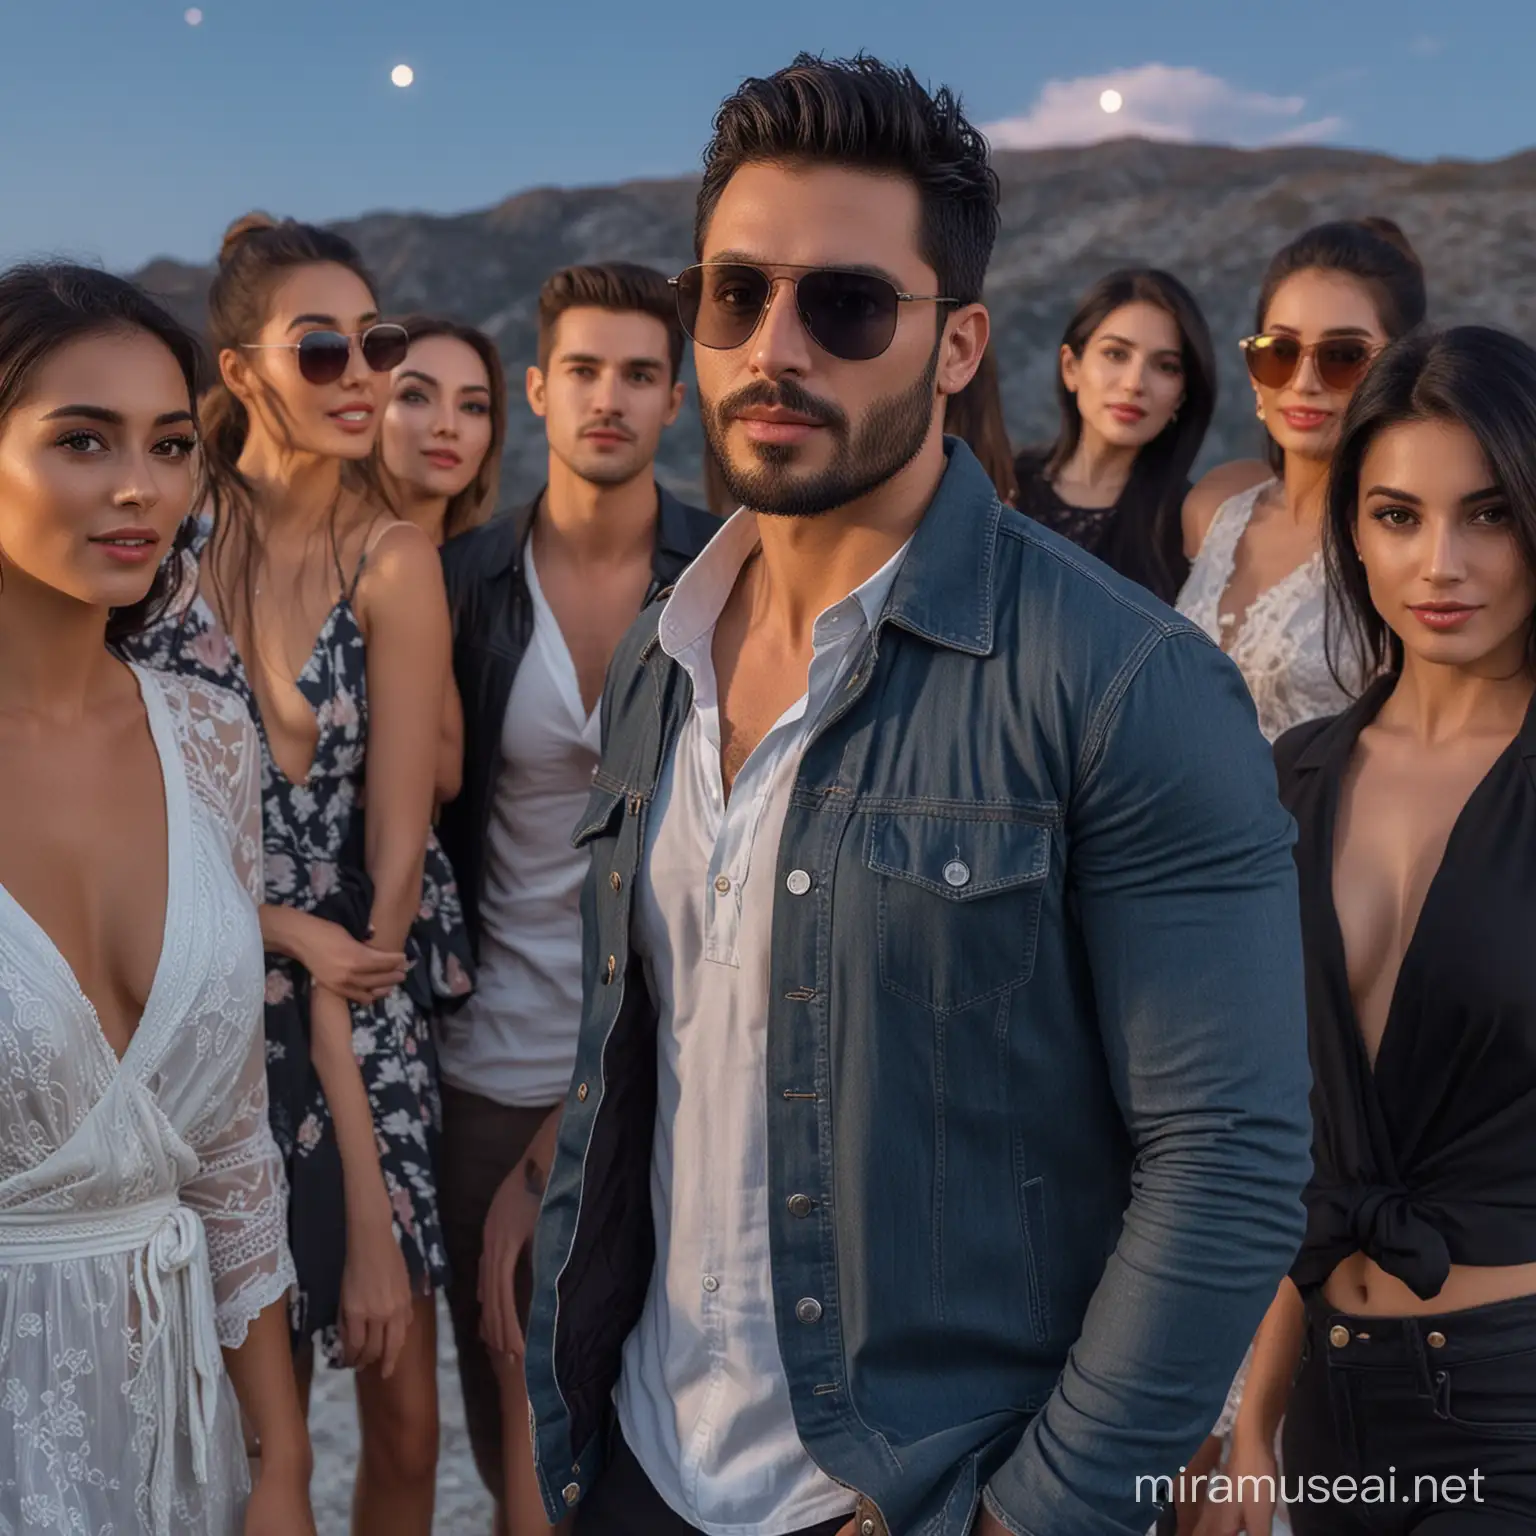 A handsome man with black hair, a stubble beard and sunglasses with a group of very sexy and beautiful women in the evening with moonlight in a mountainous place